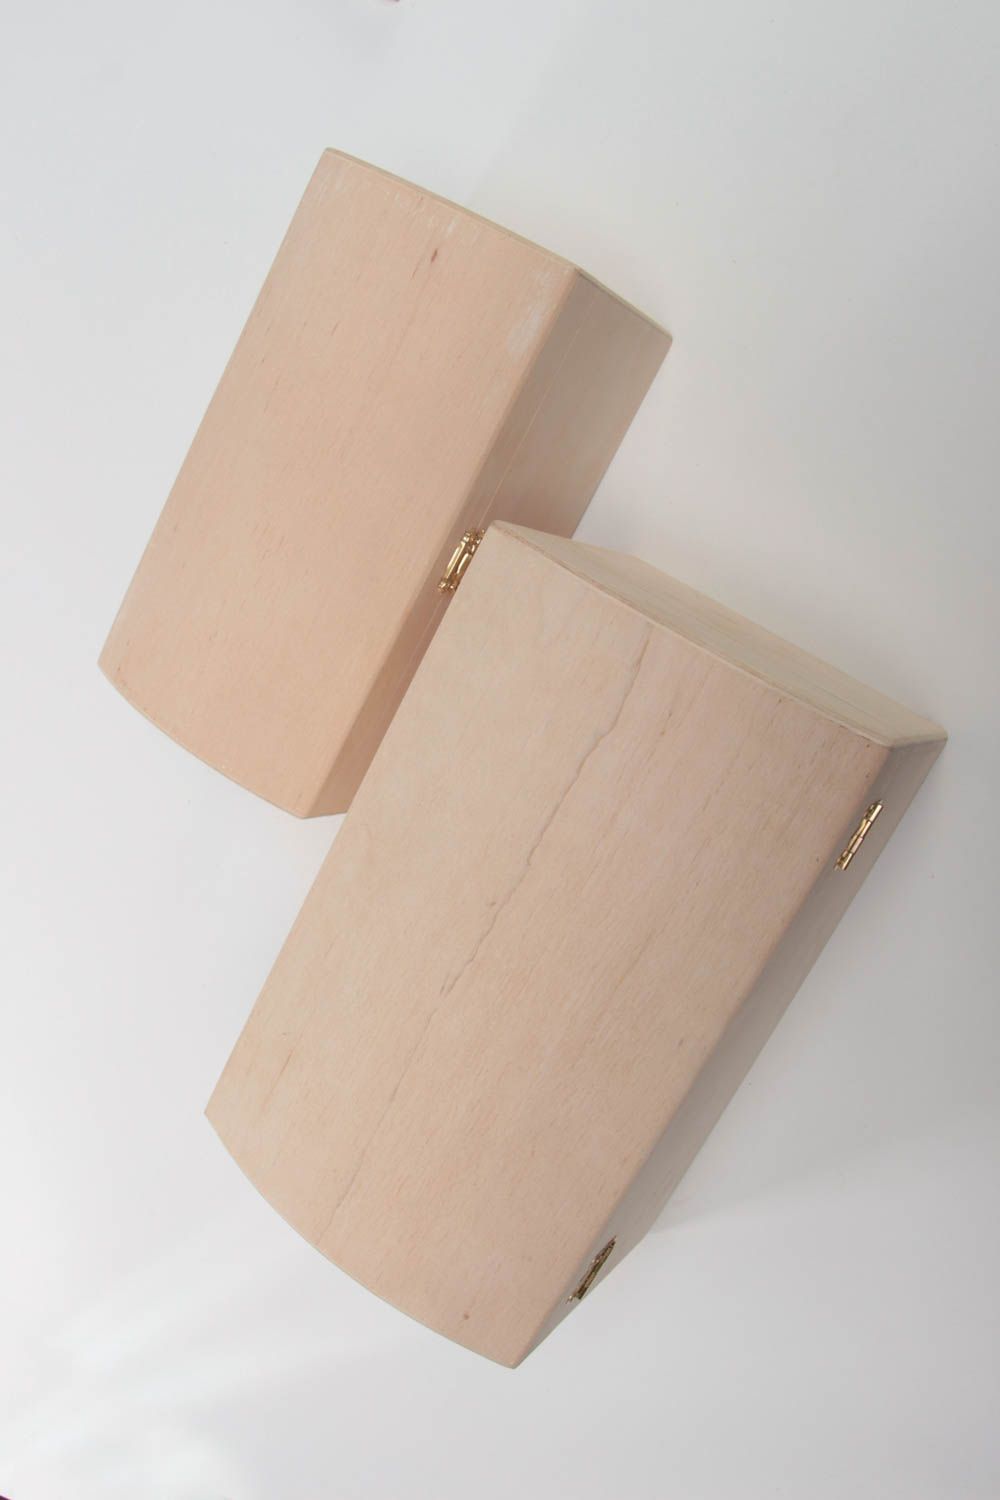 Set of 2 handmade plywood craft blanks for painting or decoupage jewelry boxes photo 3